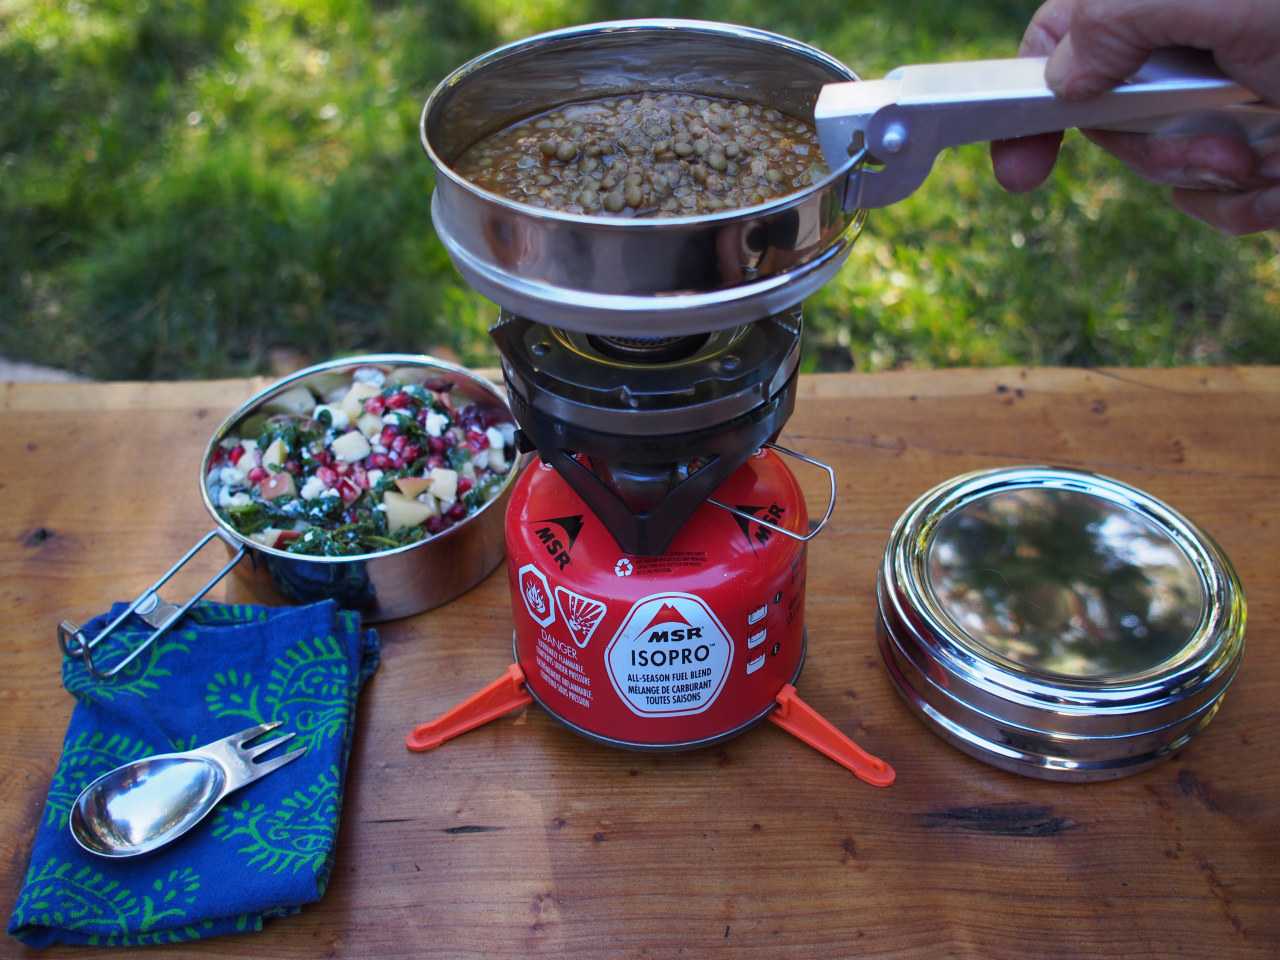 A camping stove is a handy alternative to cooking over a campfire (by Sandra Harris on Unsplash)